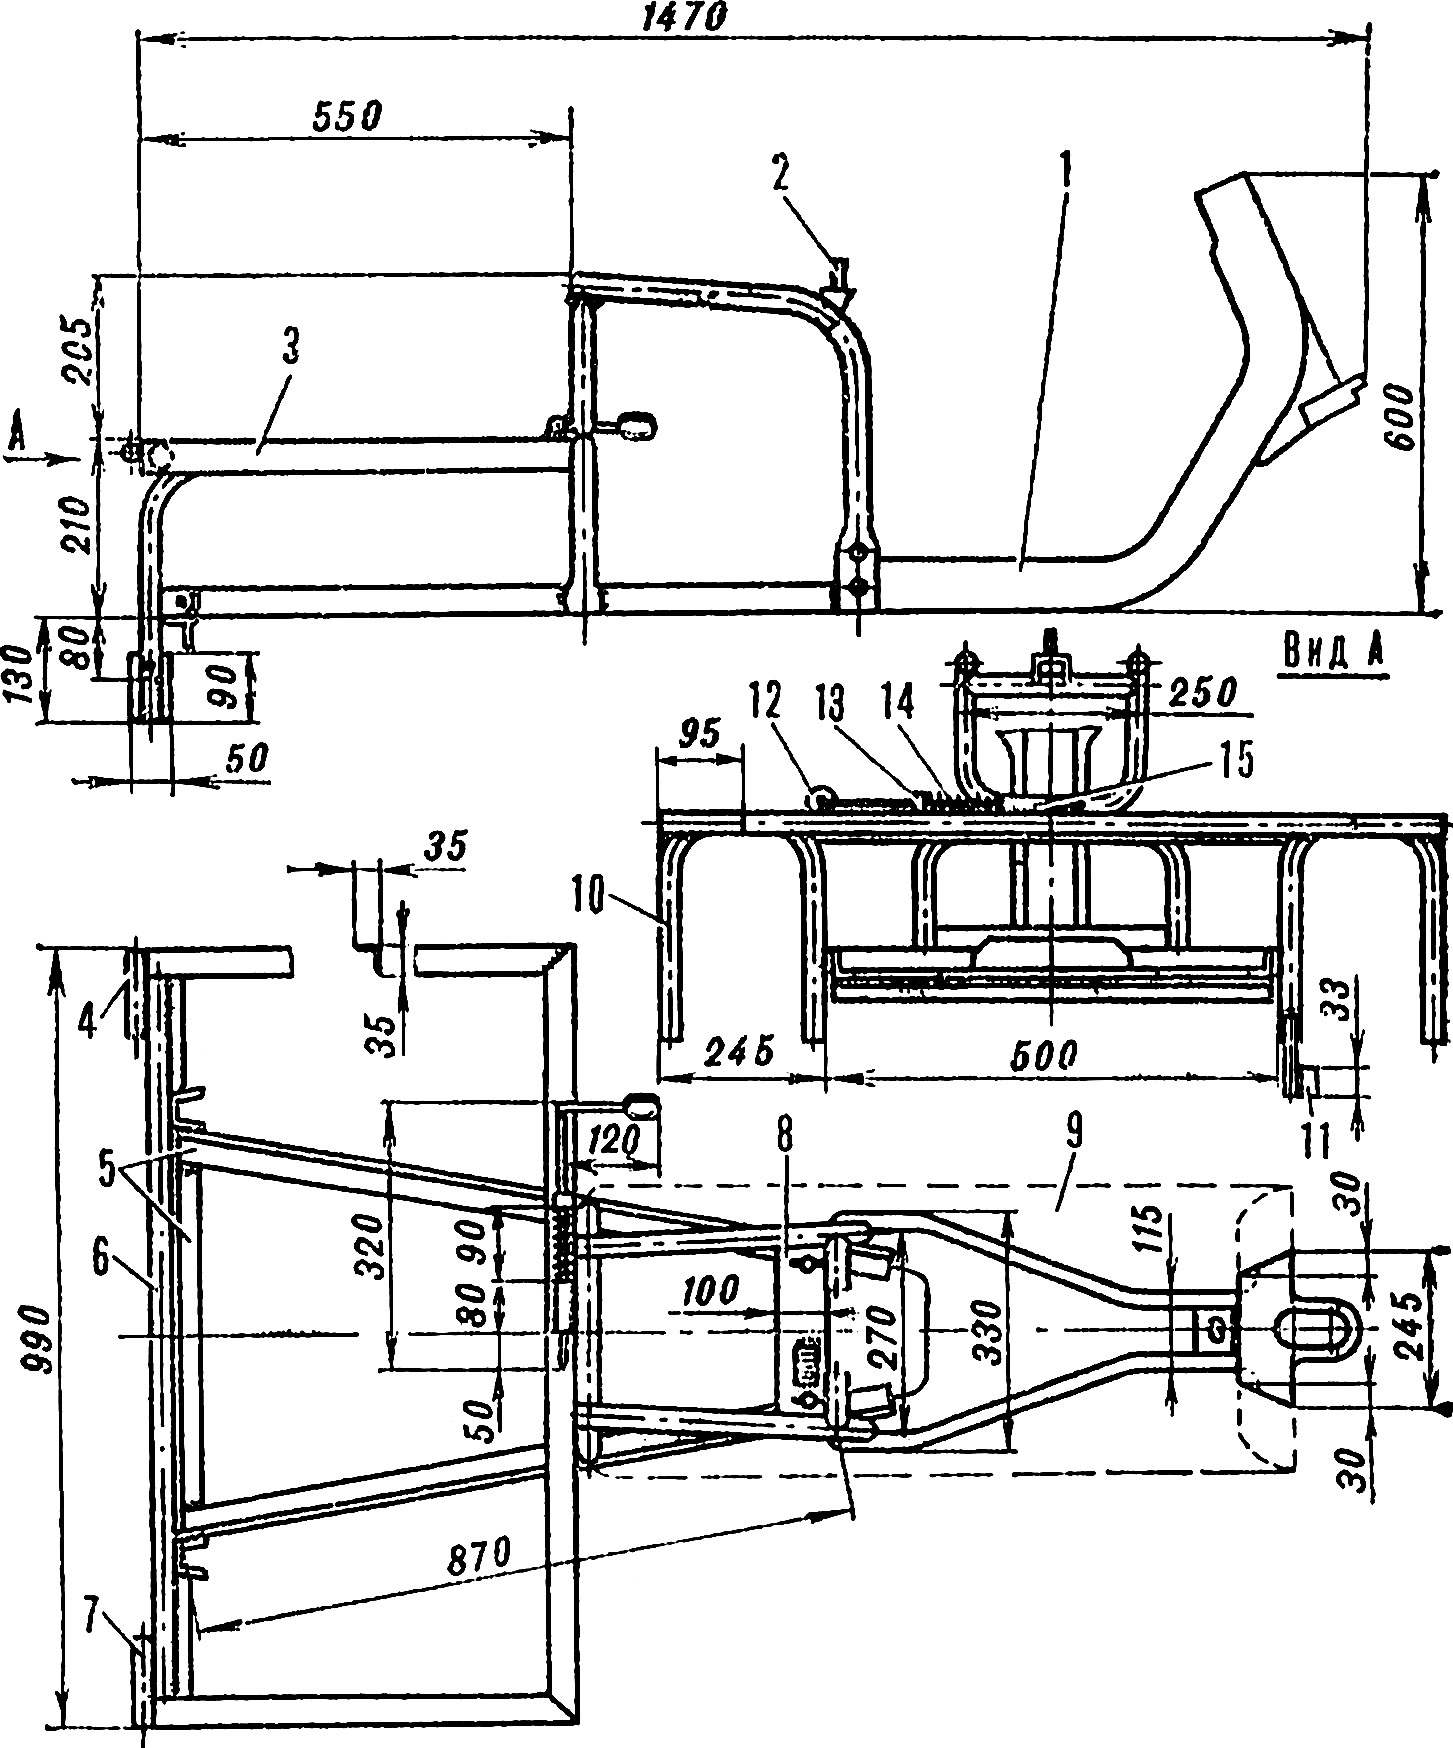 Fig. 11. The frame of the truck.